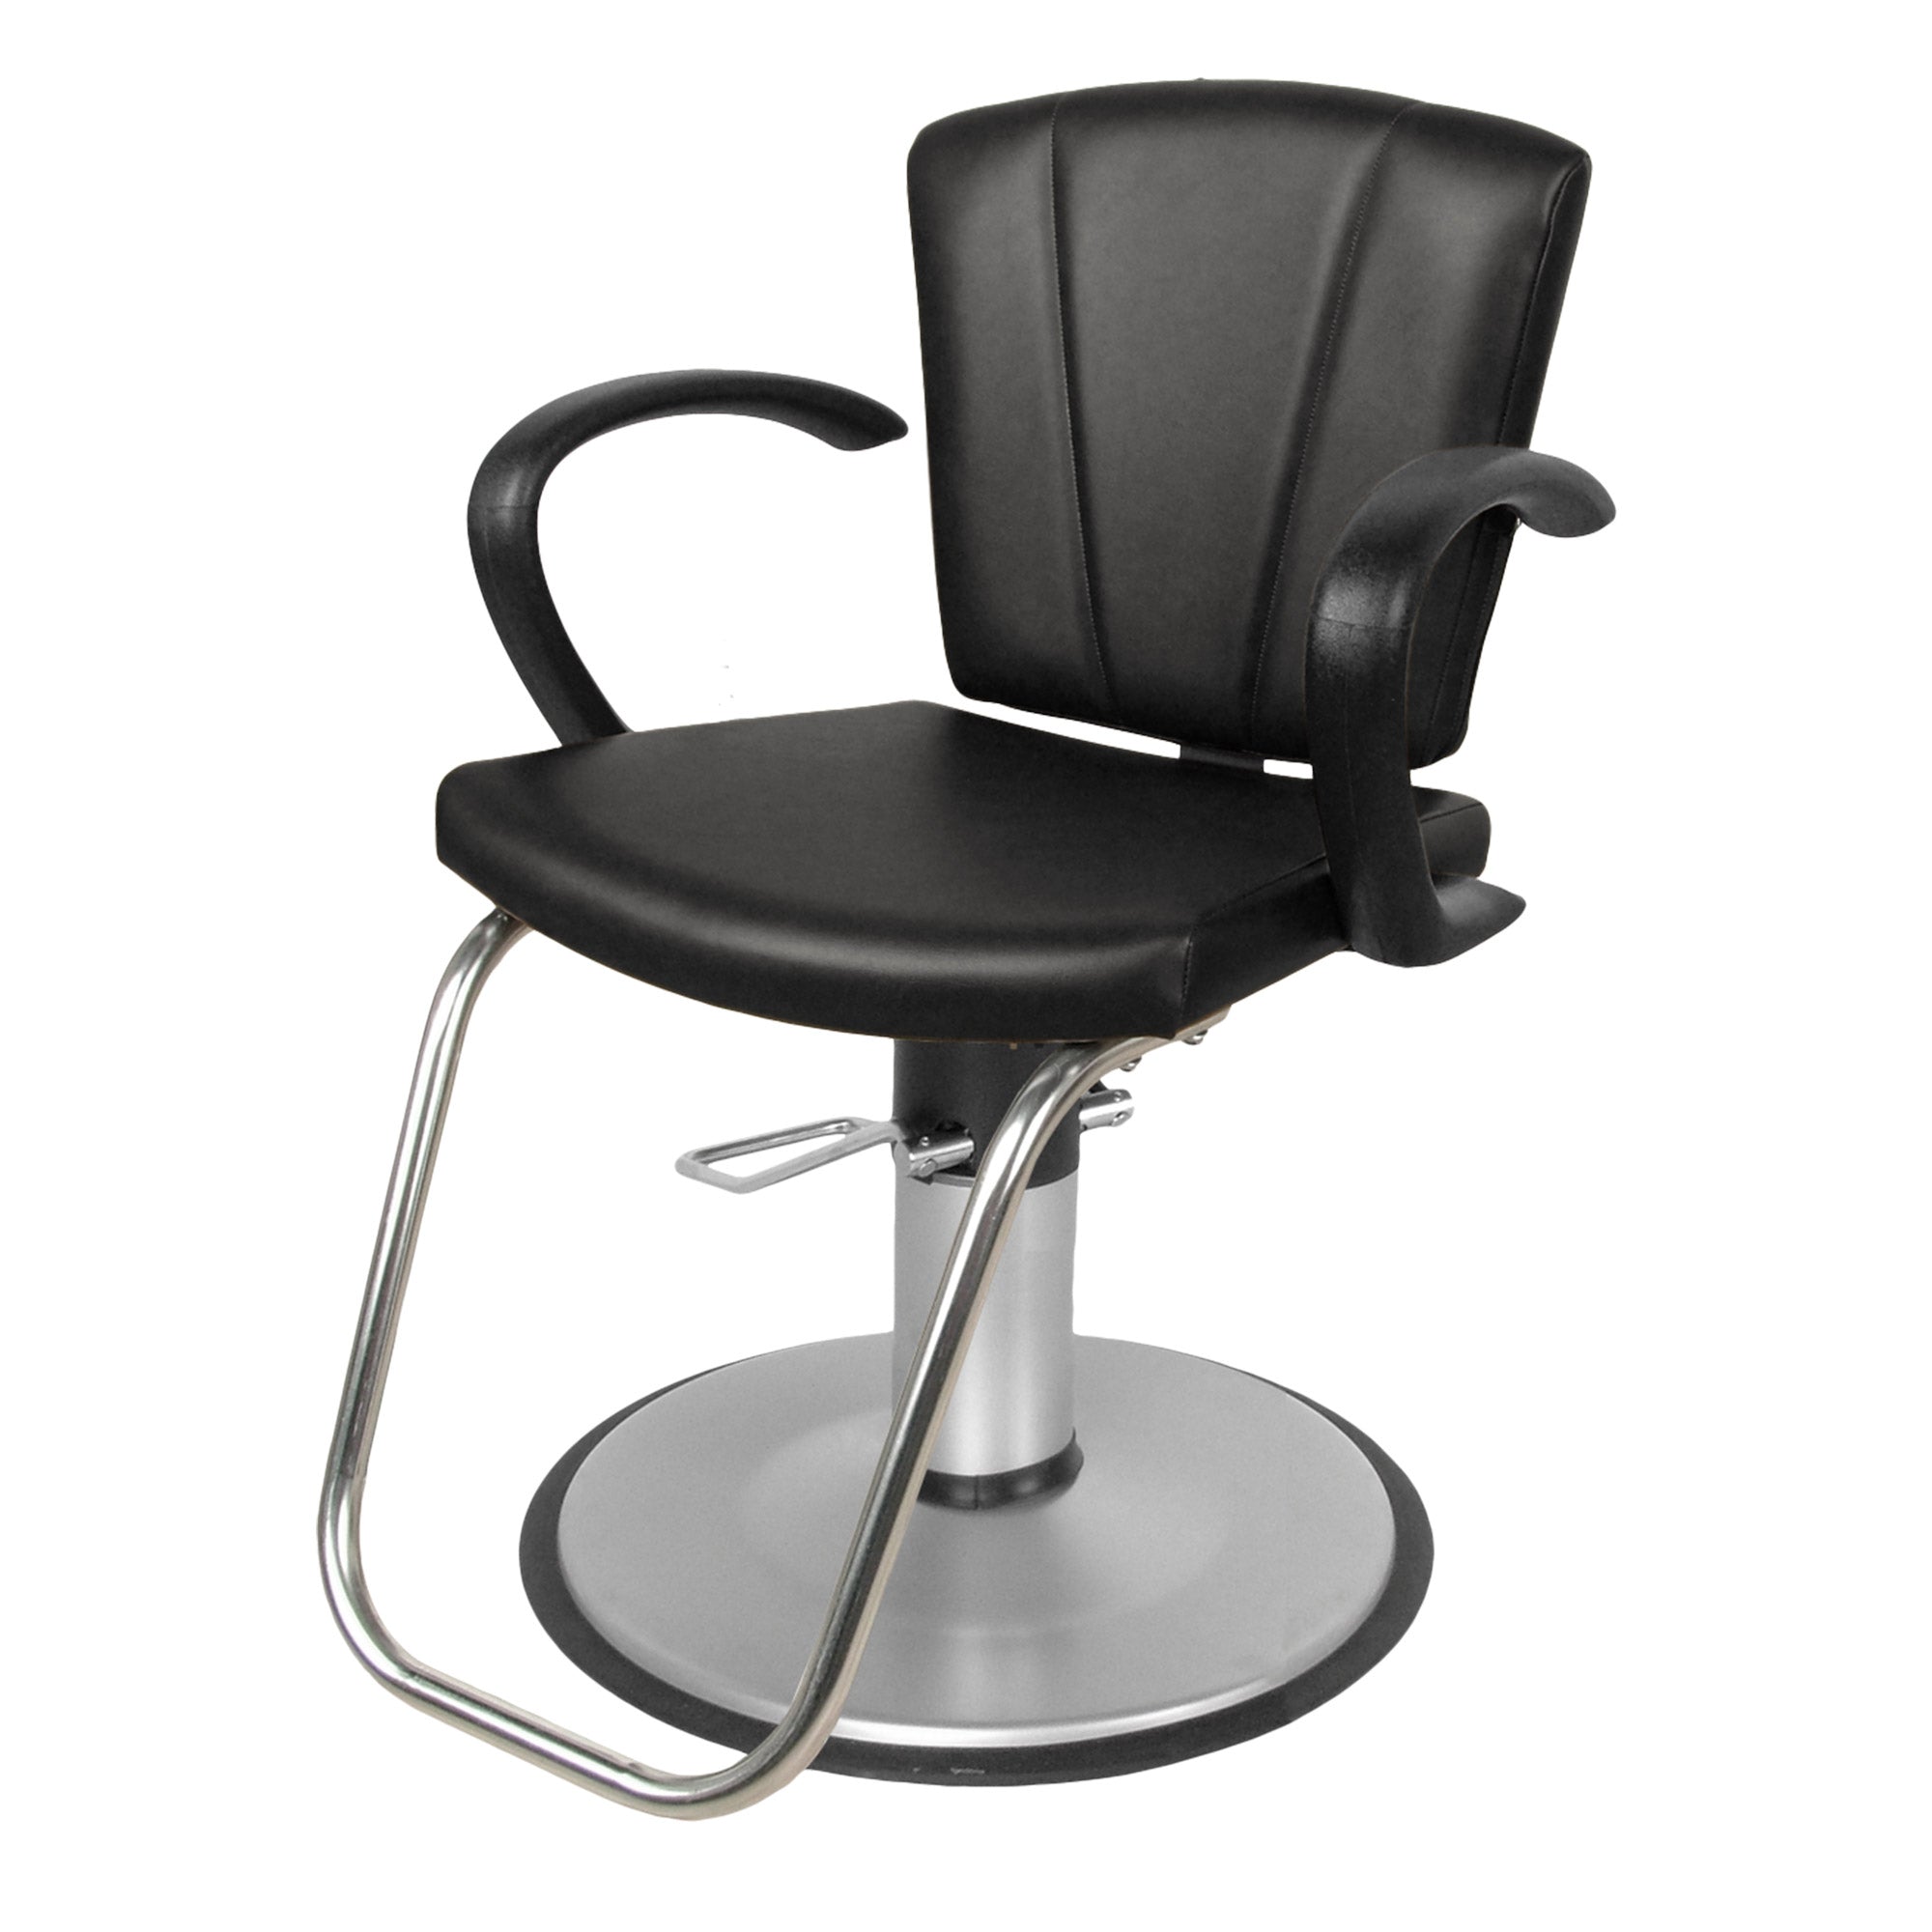 Sean Patrick Styling Chair - Collins